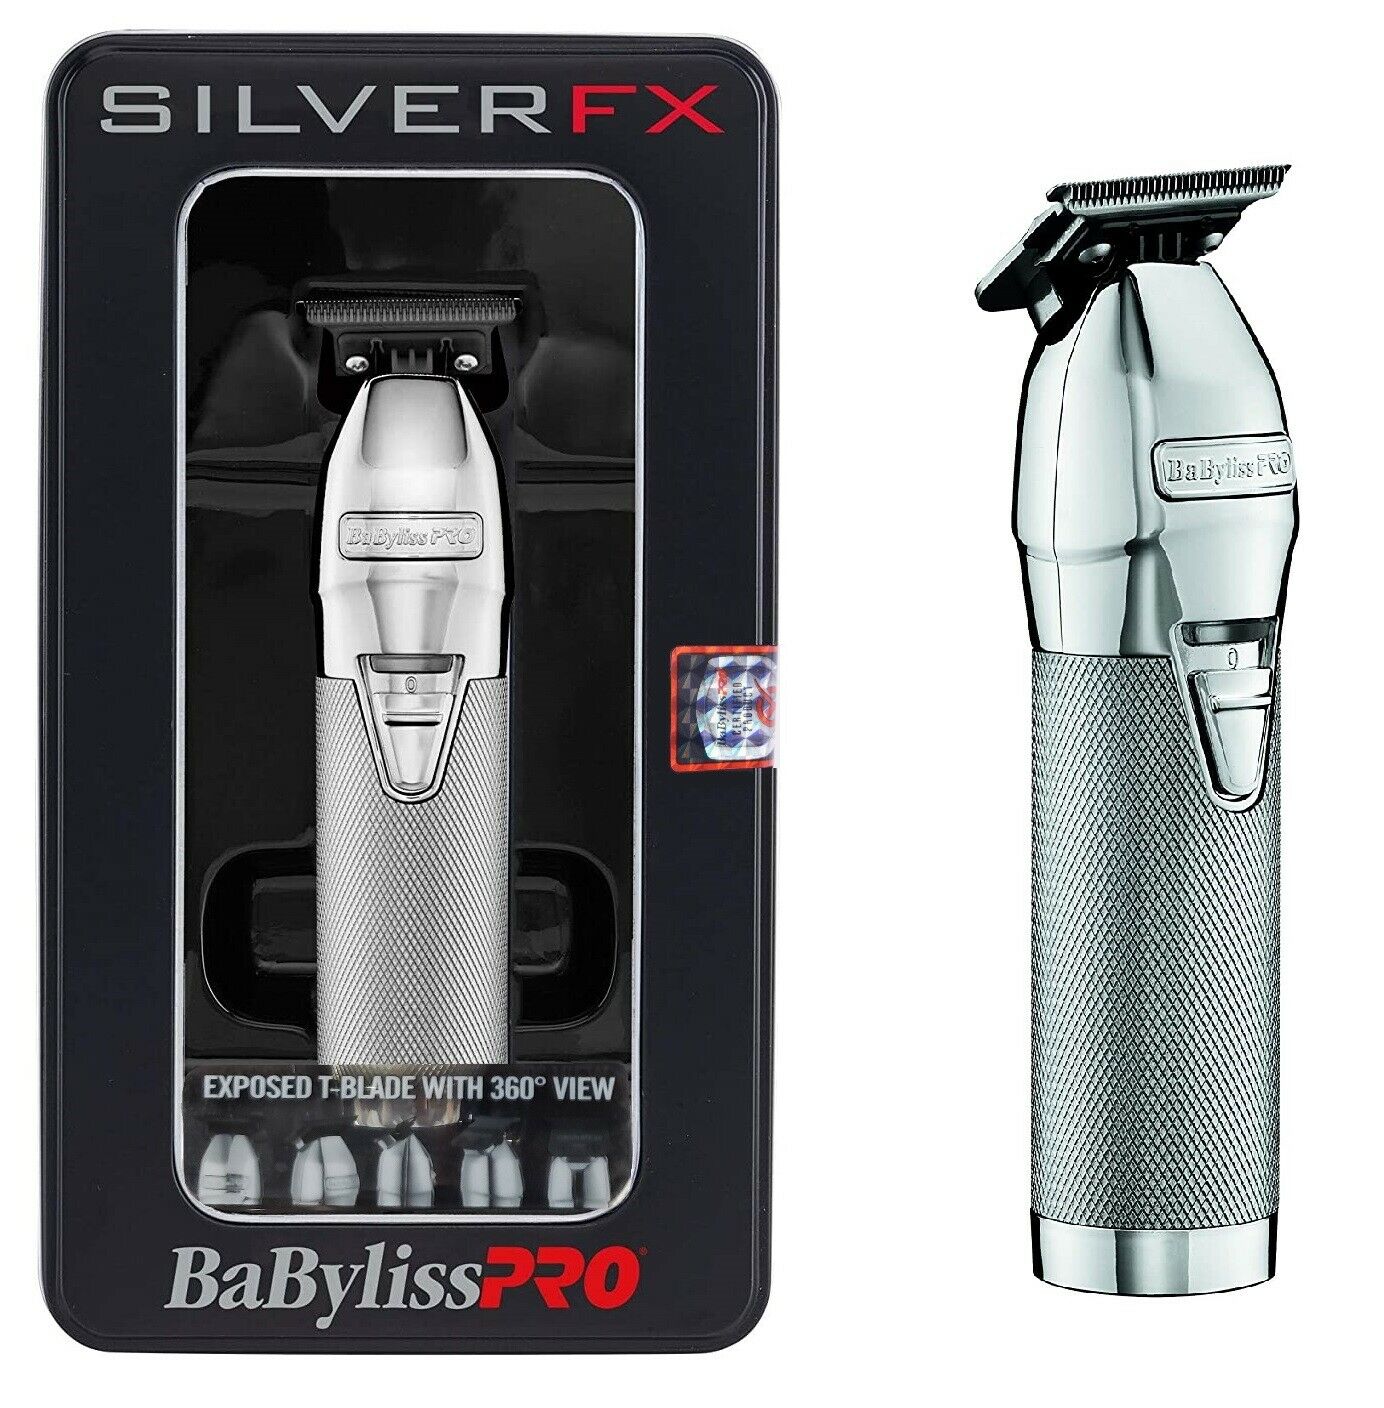 BaBylissPRO SILVERFX Metal Lithium Outlining Trimmer #FX787S